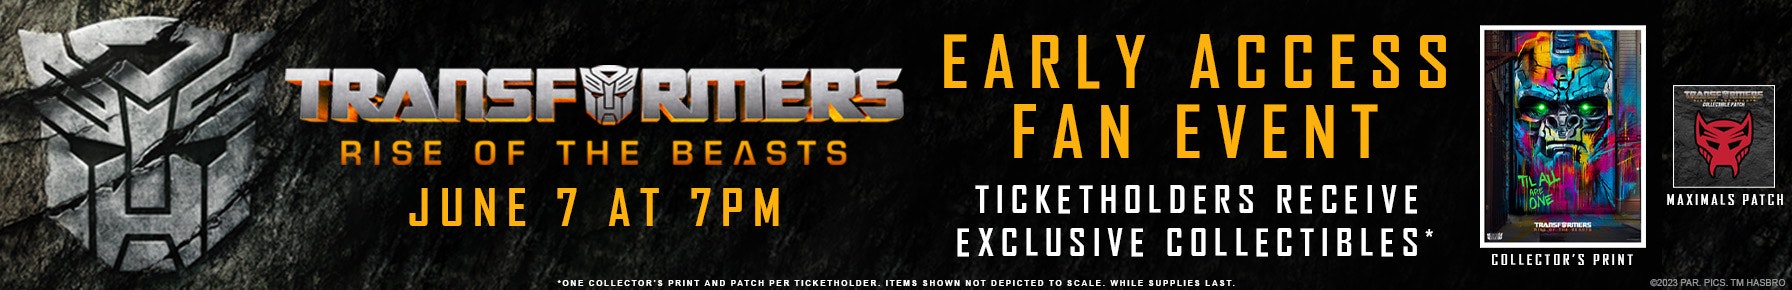 See Transformers Rise of the Beasts at Harkins and receive free collectibles while supplies last